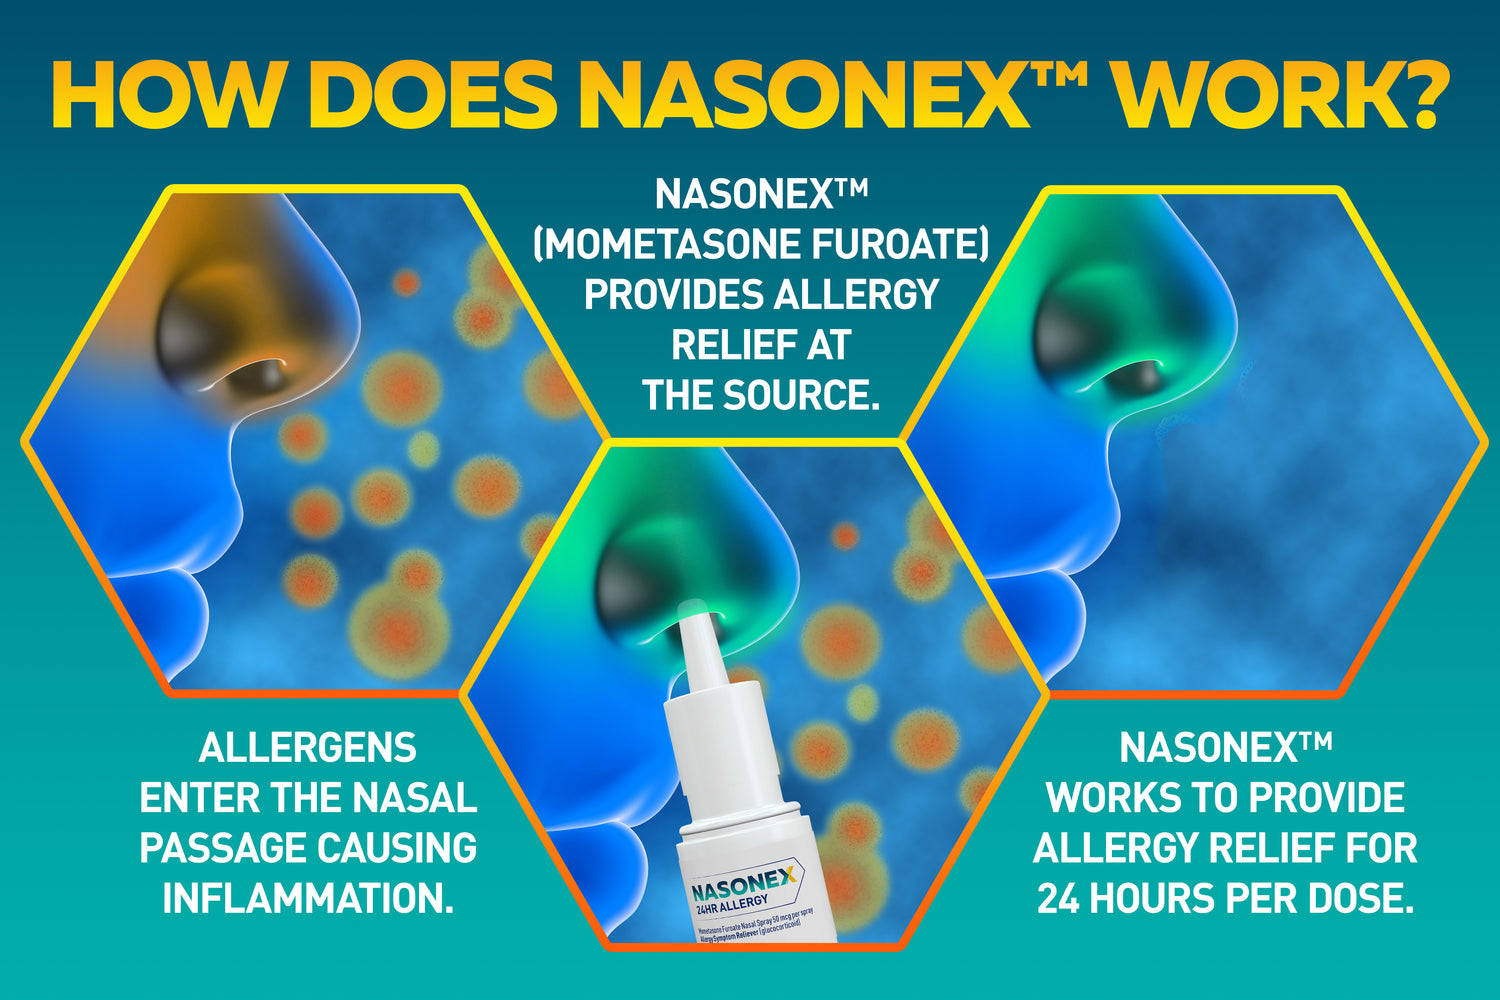 Nasonex provides allergy relief at the source.